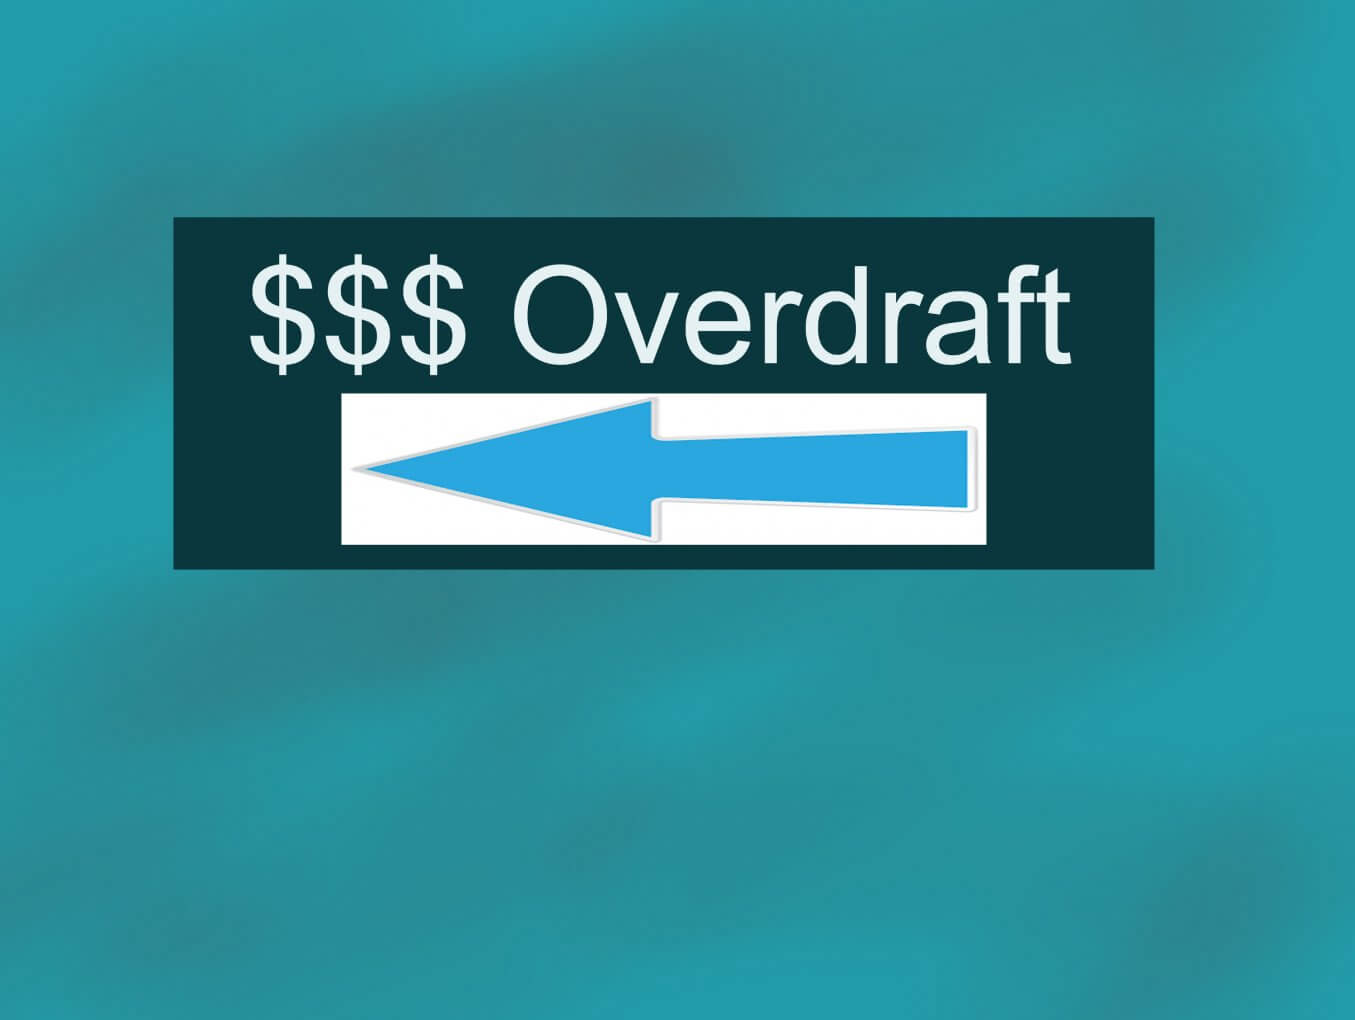 Small Business Overdraft working for you or the Bank?